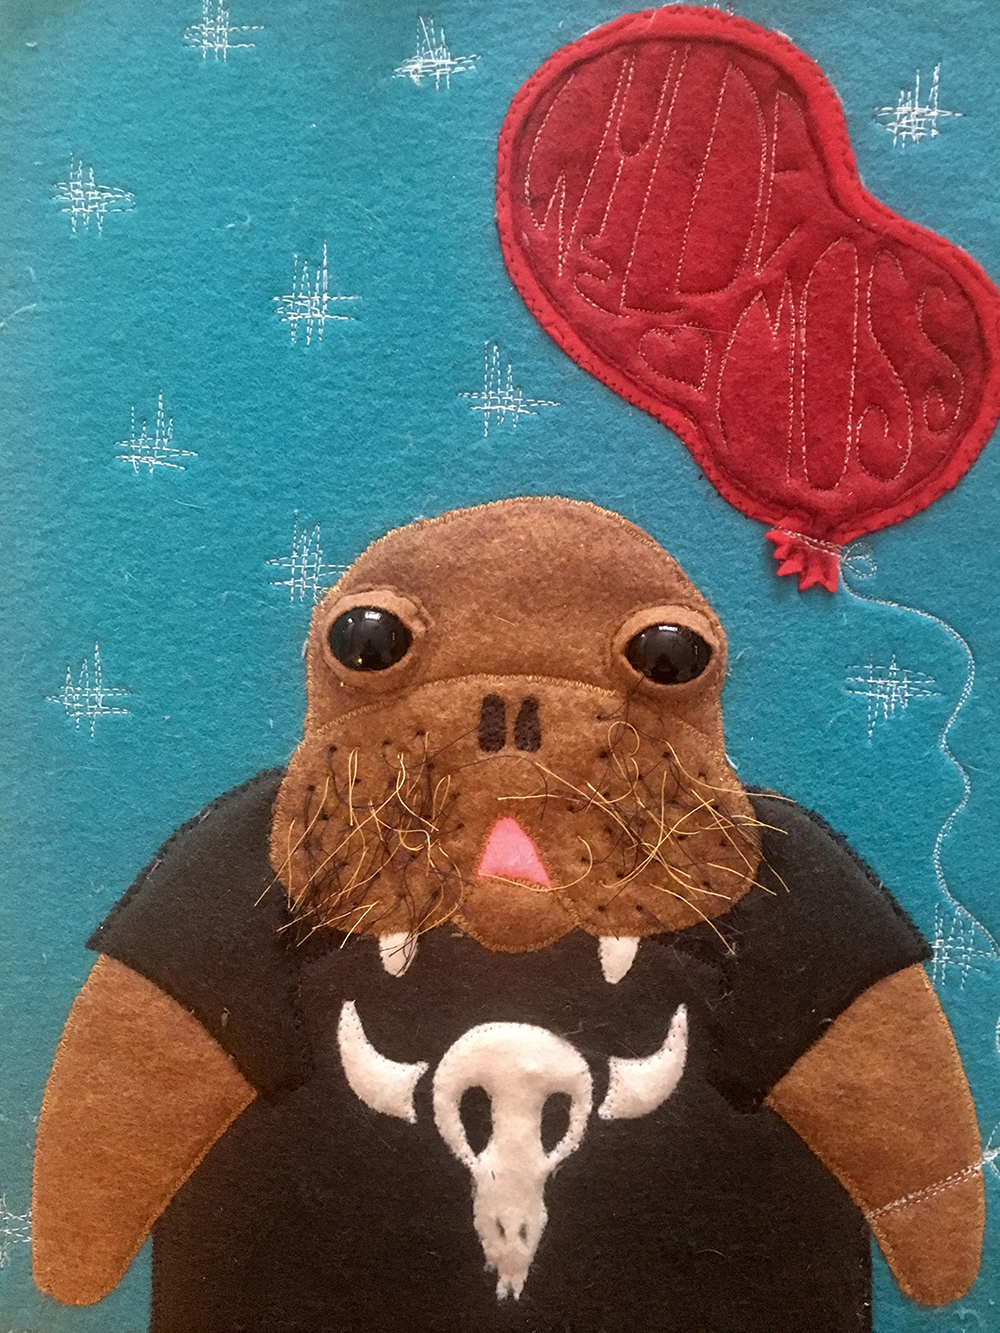 felt portrait of a walrus in a t-shirt with a baloon